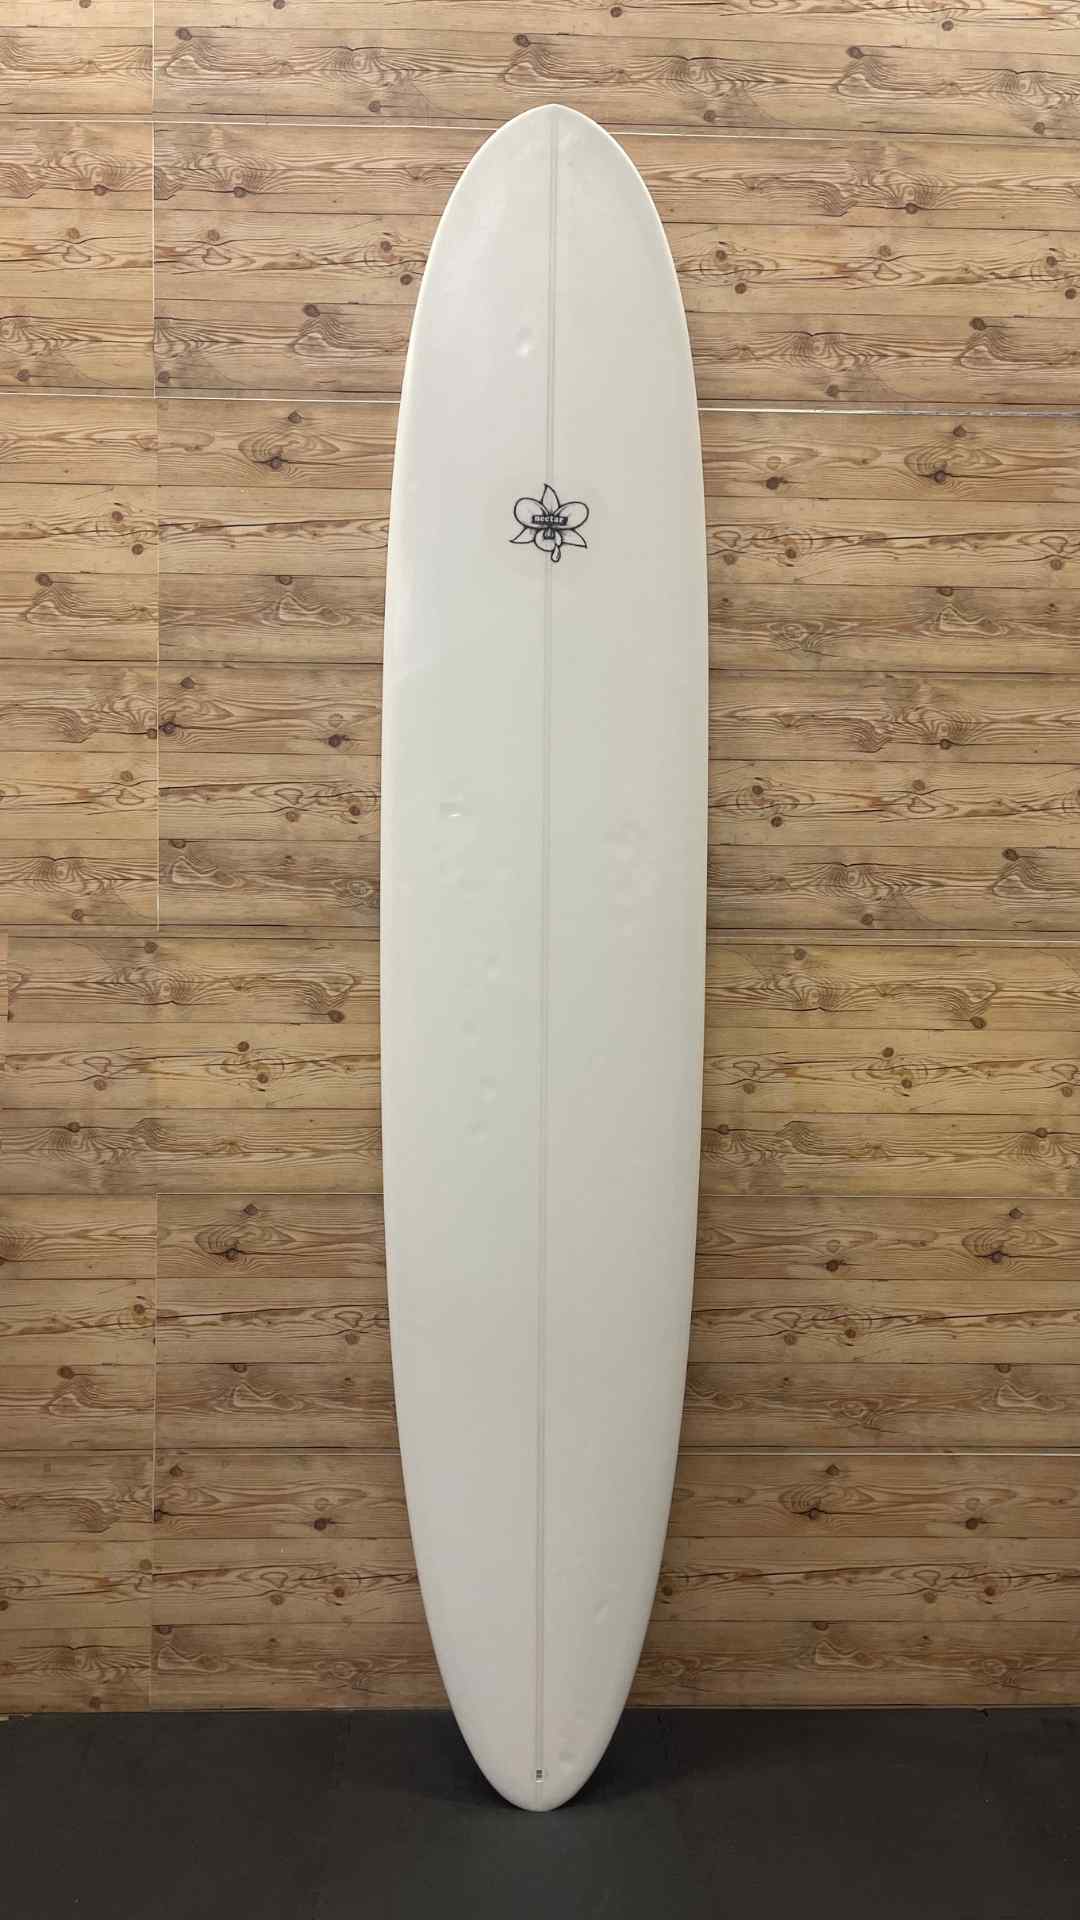 Nectar Performance Noserider for Sale San Diego – The Board Source